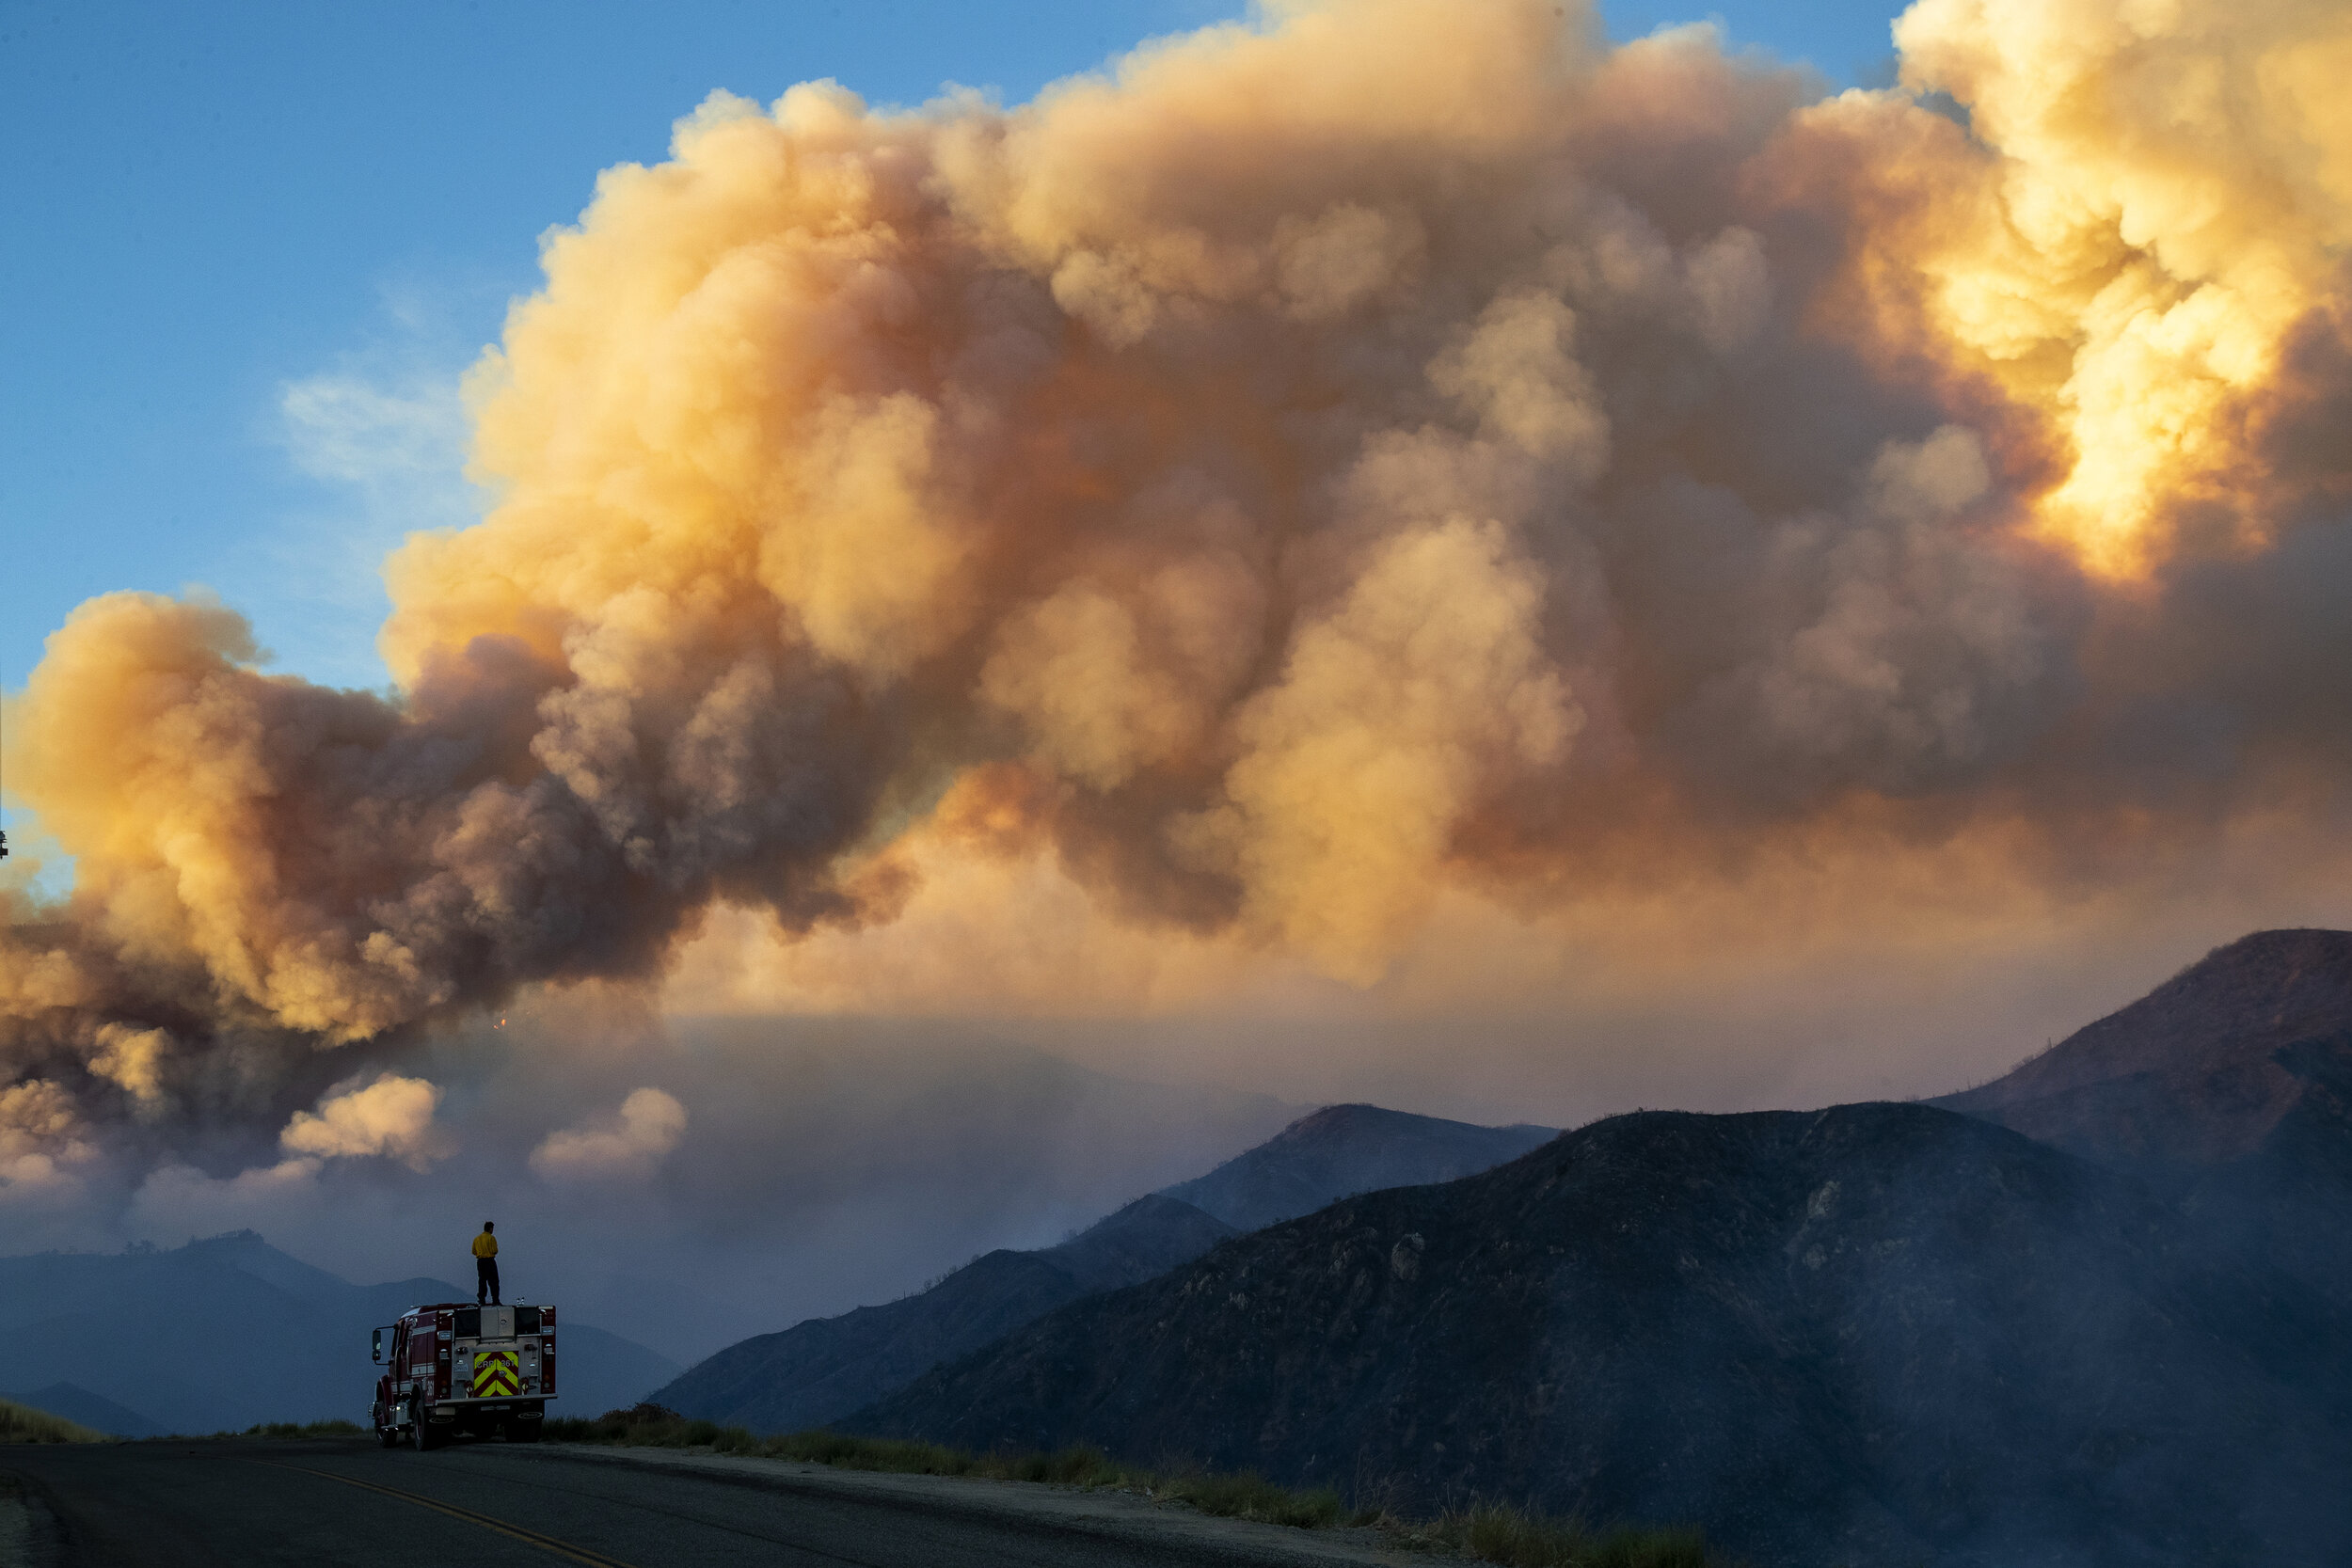  CHERRY VALLEY, CA - AUGUST 1, 2020: Firefighter Taylor Barnett from Carpinteria-Summerland Fire department monitors the huge plume from the out-of-control  Apple fire  north of Banning during the  coronavirus pandemic on August 1, 2020 in Cherry Val